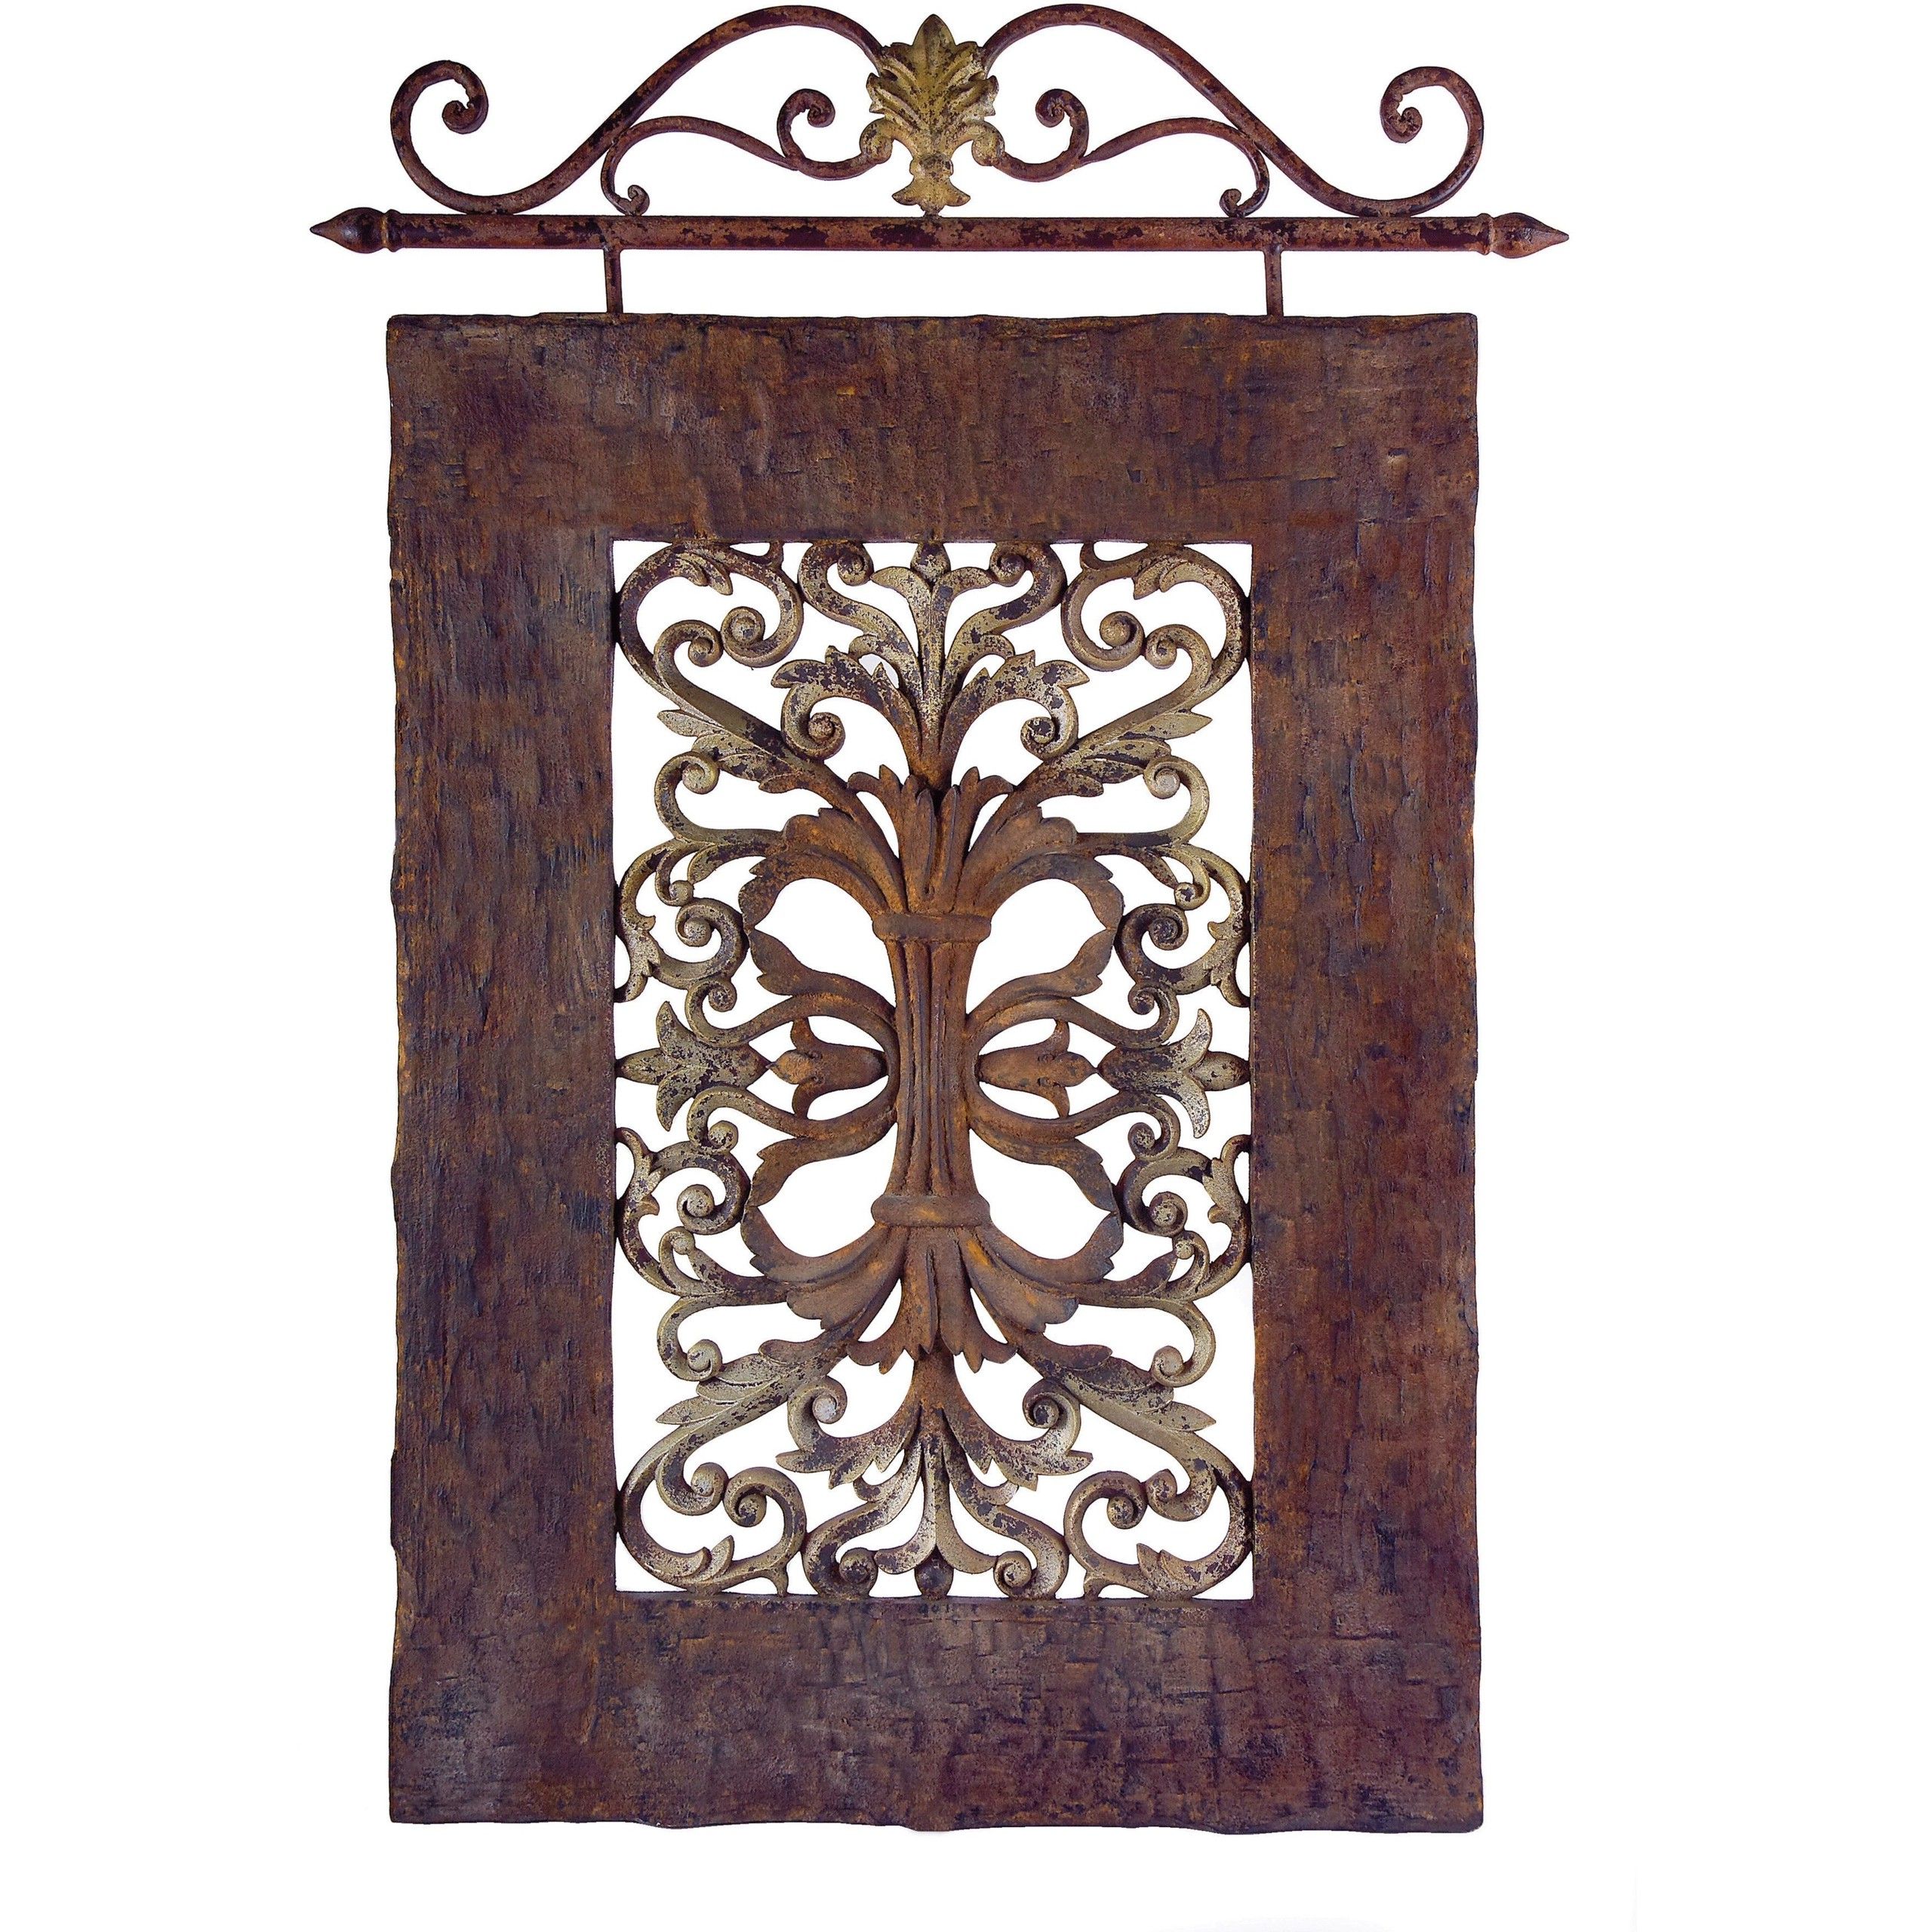 Scrollwork Metal Wall Art Intended For Favorite Iron Scroll Wall Art – Ideas On Foter (View 2 of 15)